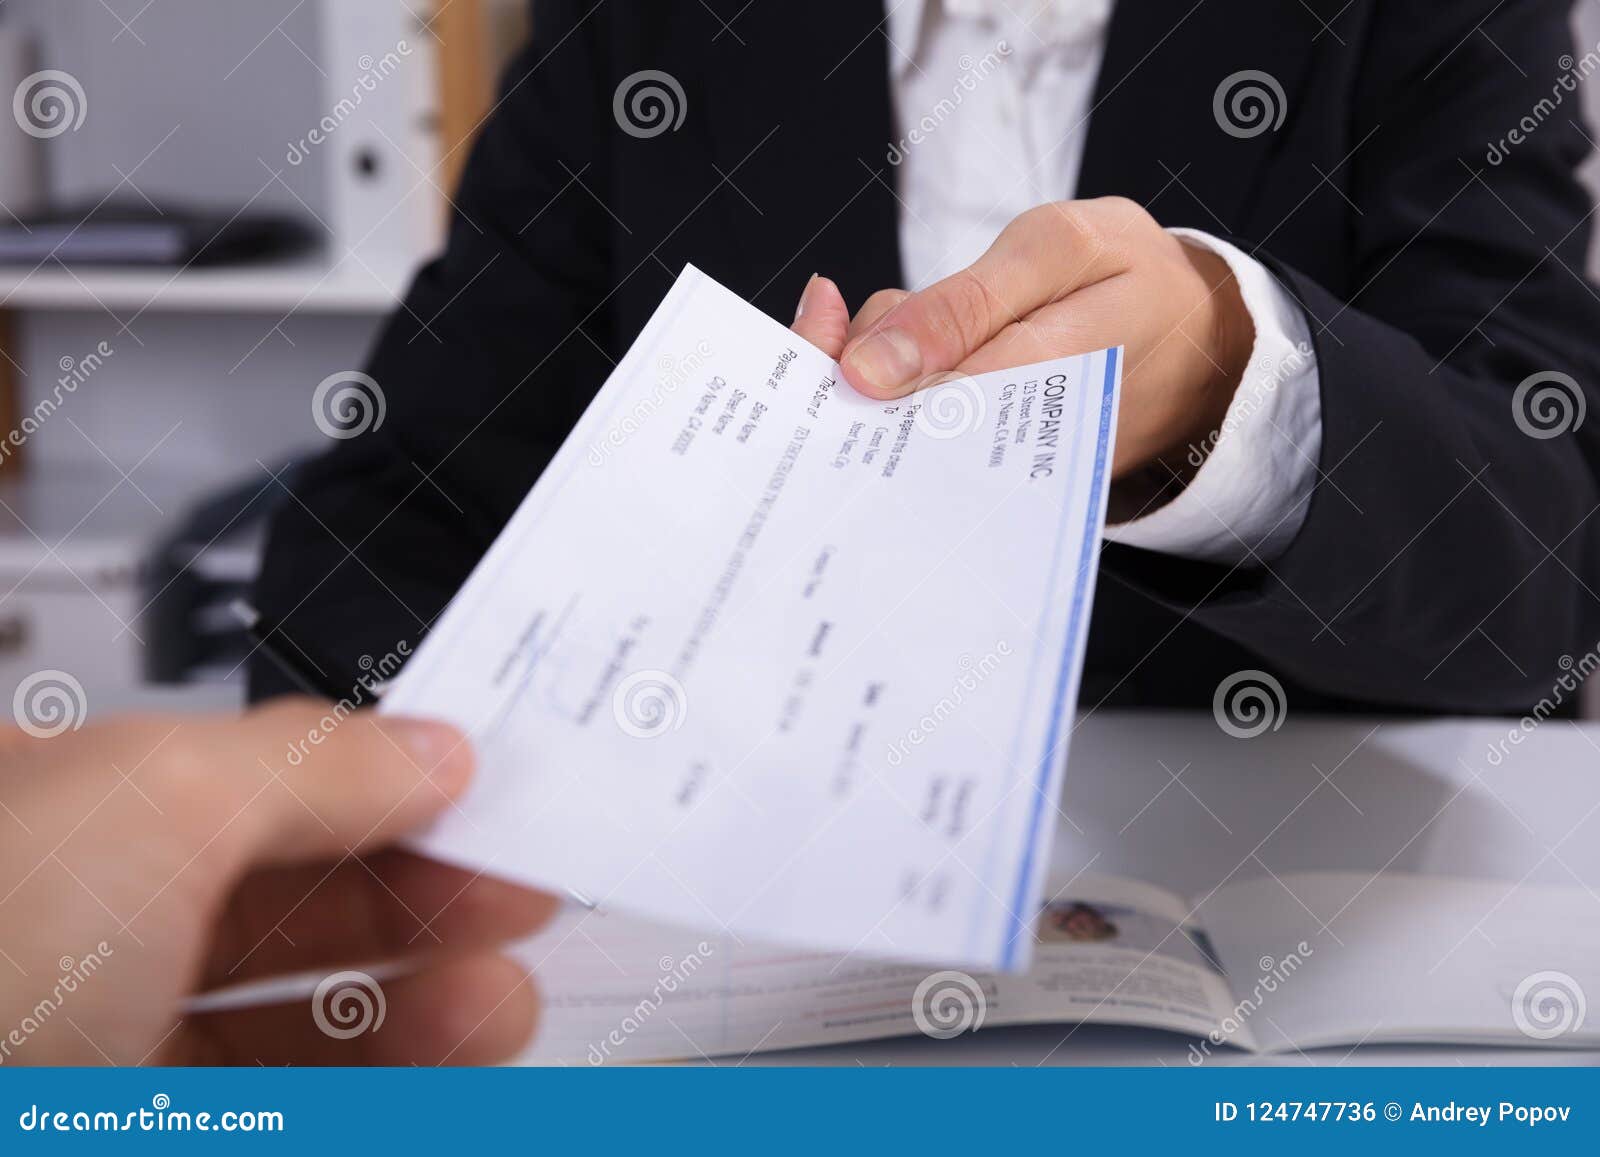 business woman handing over cheque to her colleague